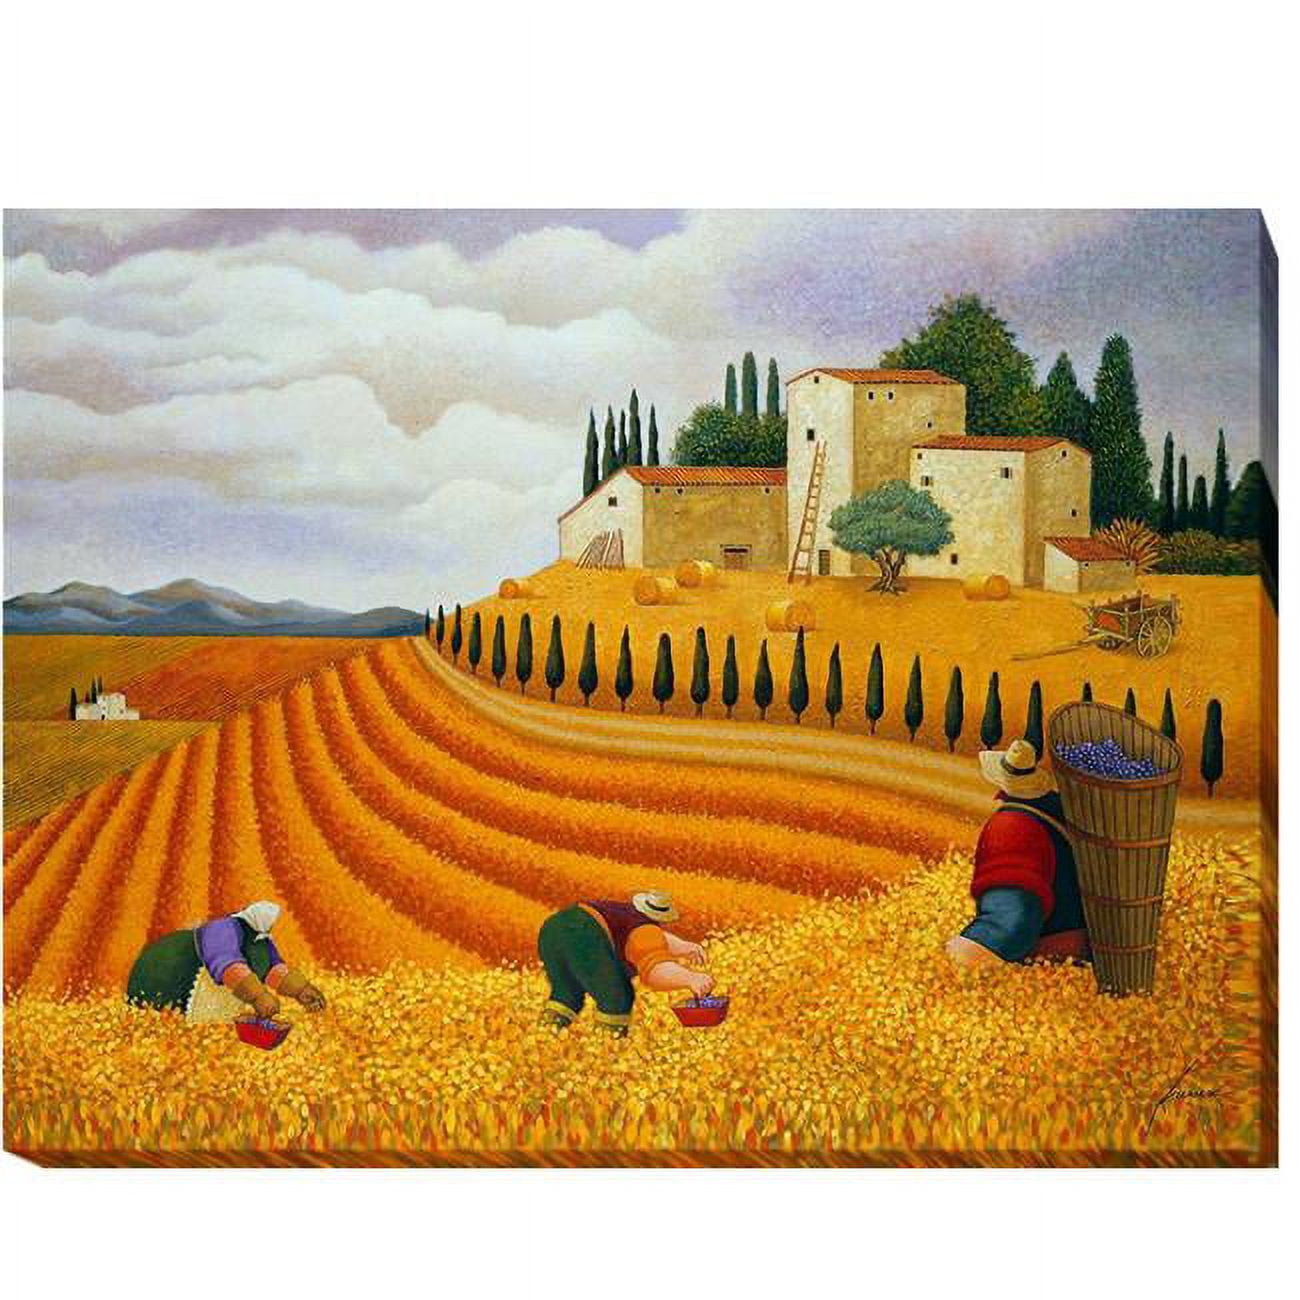 3040p394ig Village Harvest By Lowell Herrero Premium Oversize Gallery-wrapped Canvas Giclee Art - 30 X 40 X 1.5 In.